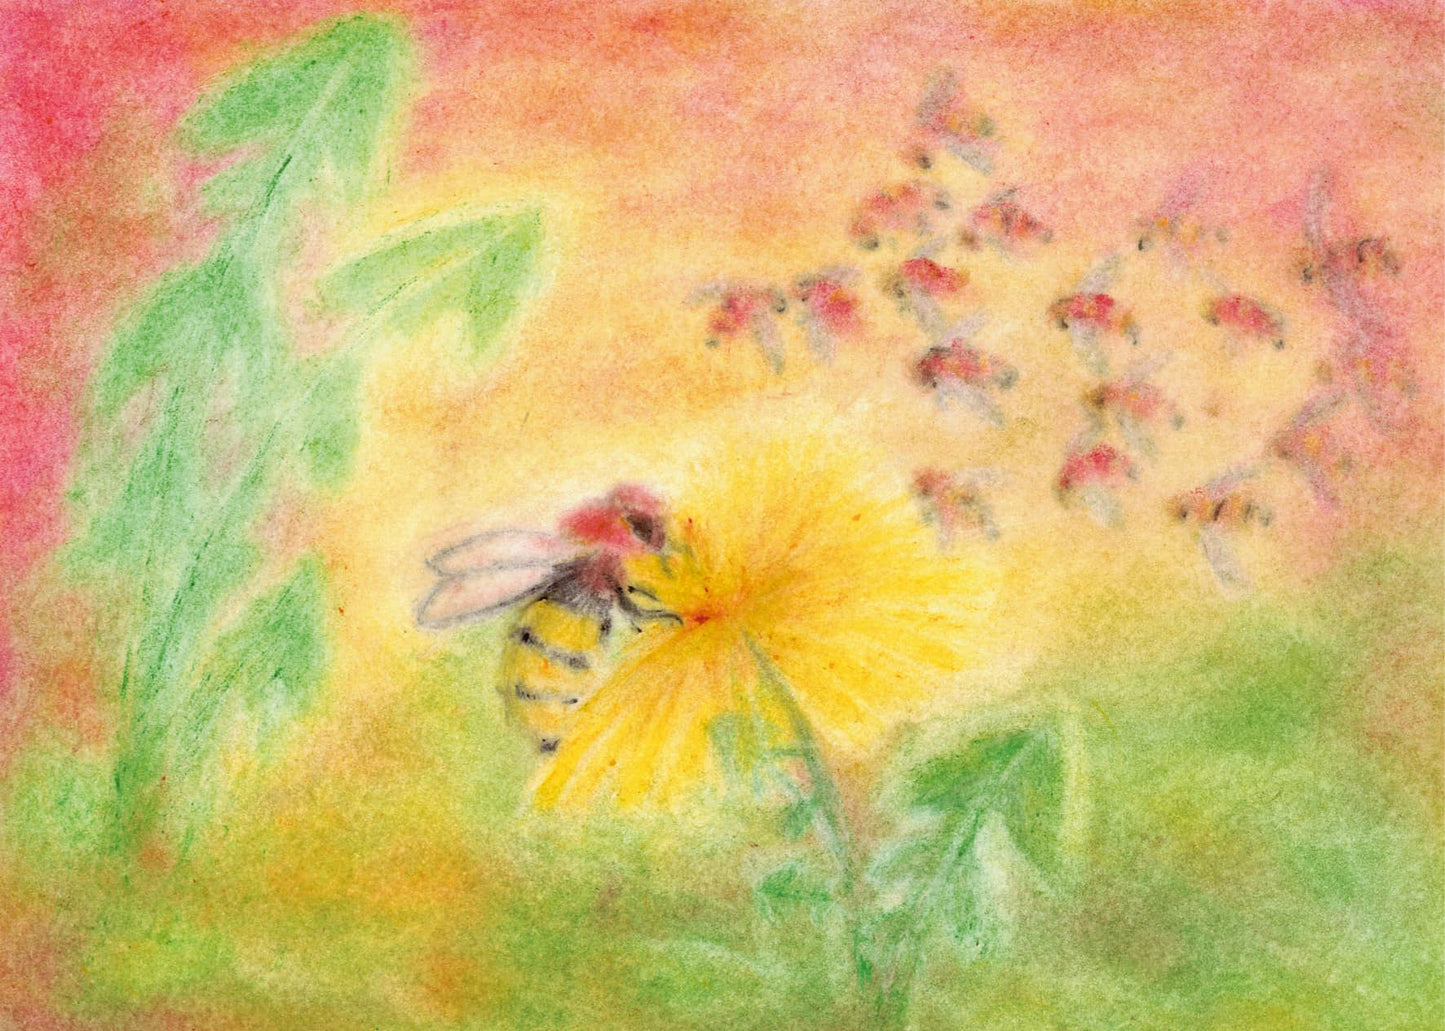 Seccorell postcard with a lively bee on a sunny dandelion flower, painted in soft pastel tones without water or fixative.